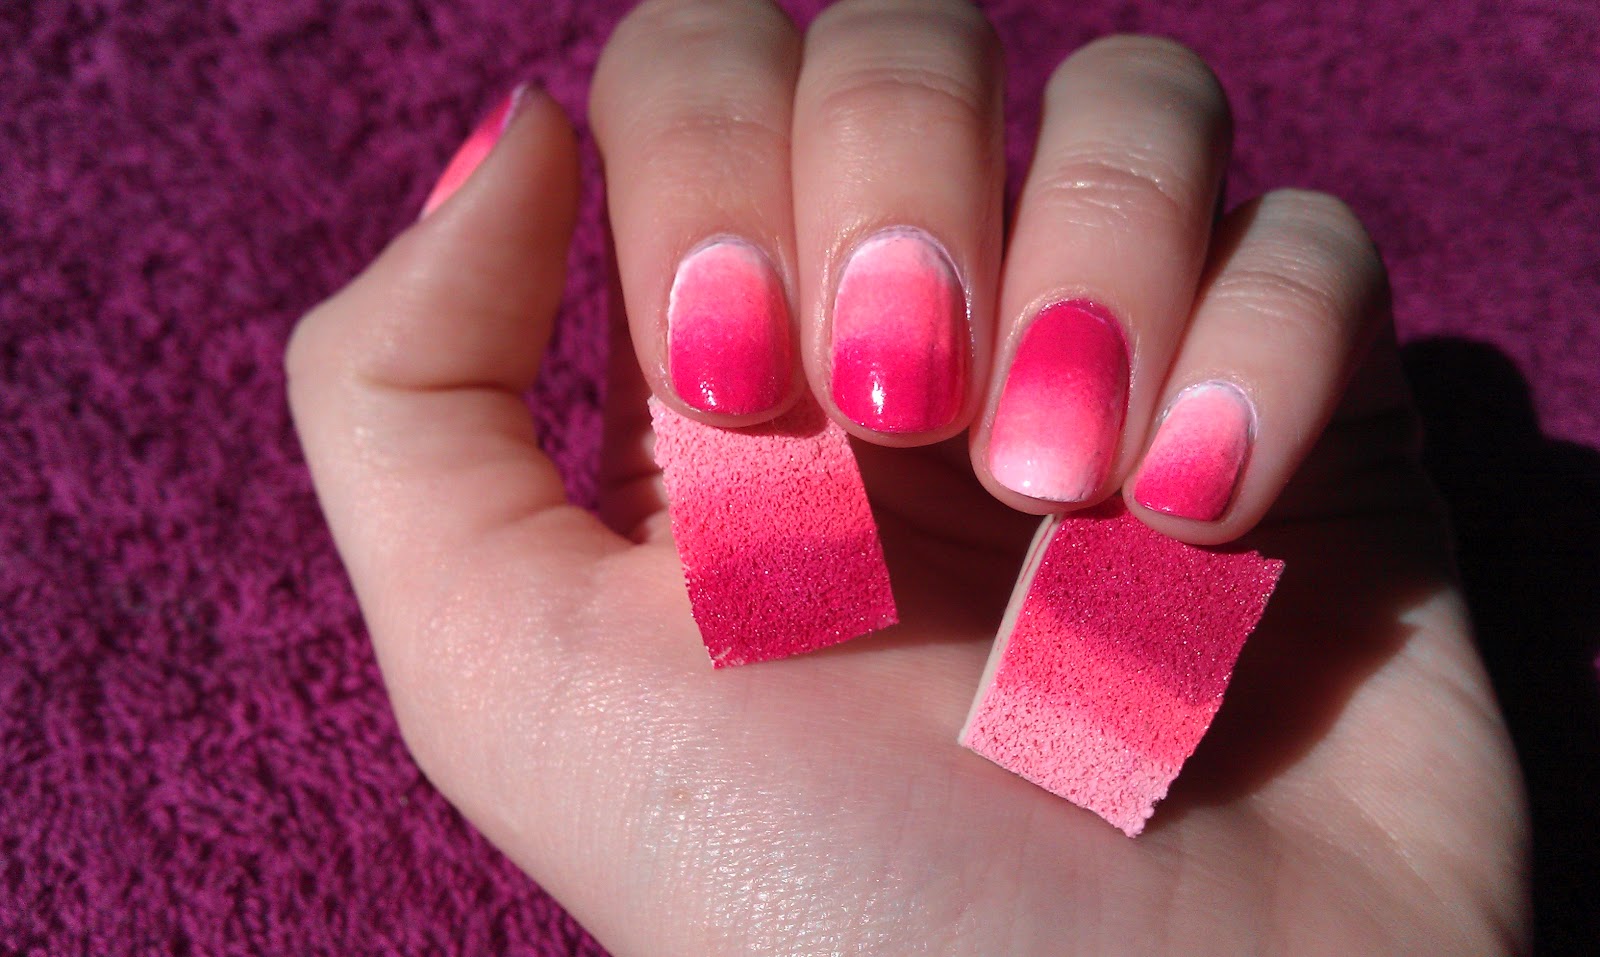 7. Stunning Ombre Nail Art Photos - wide 7